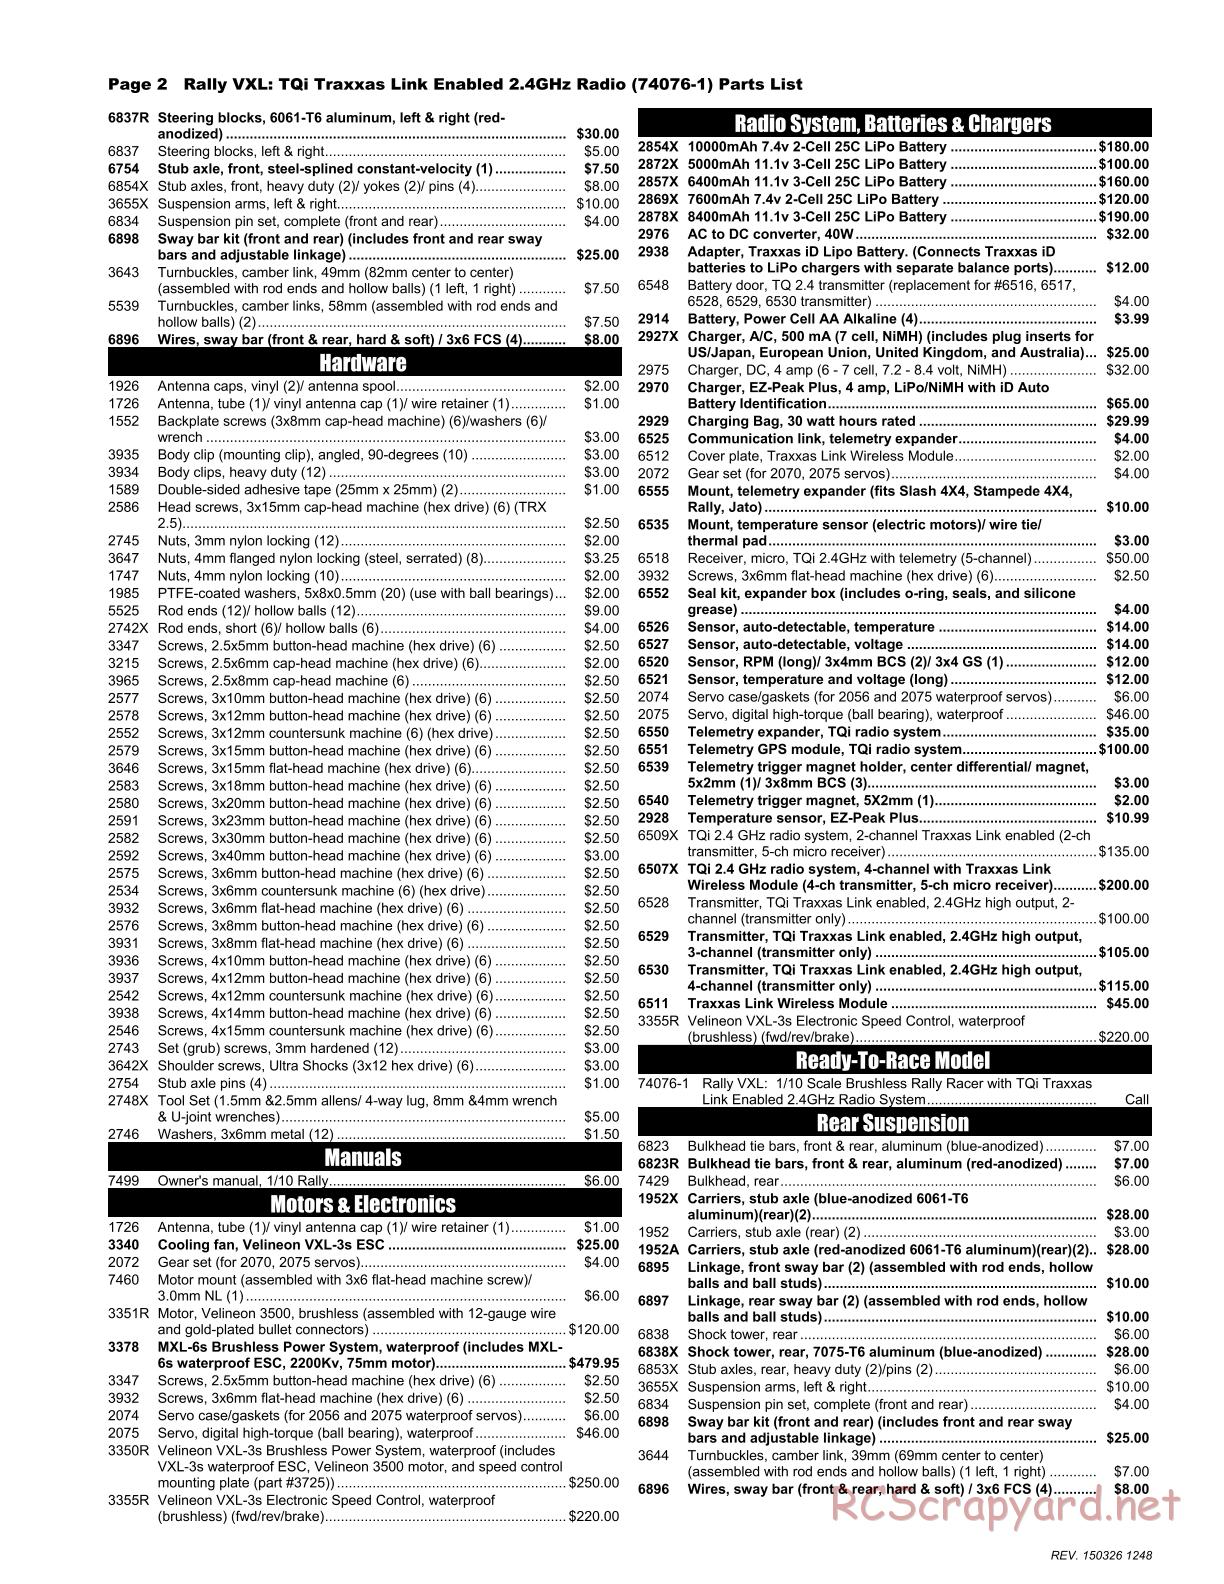 Traxxas - Rally (2015) - Parts List - Page 2